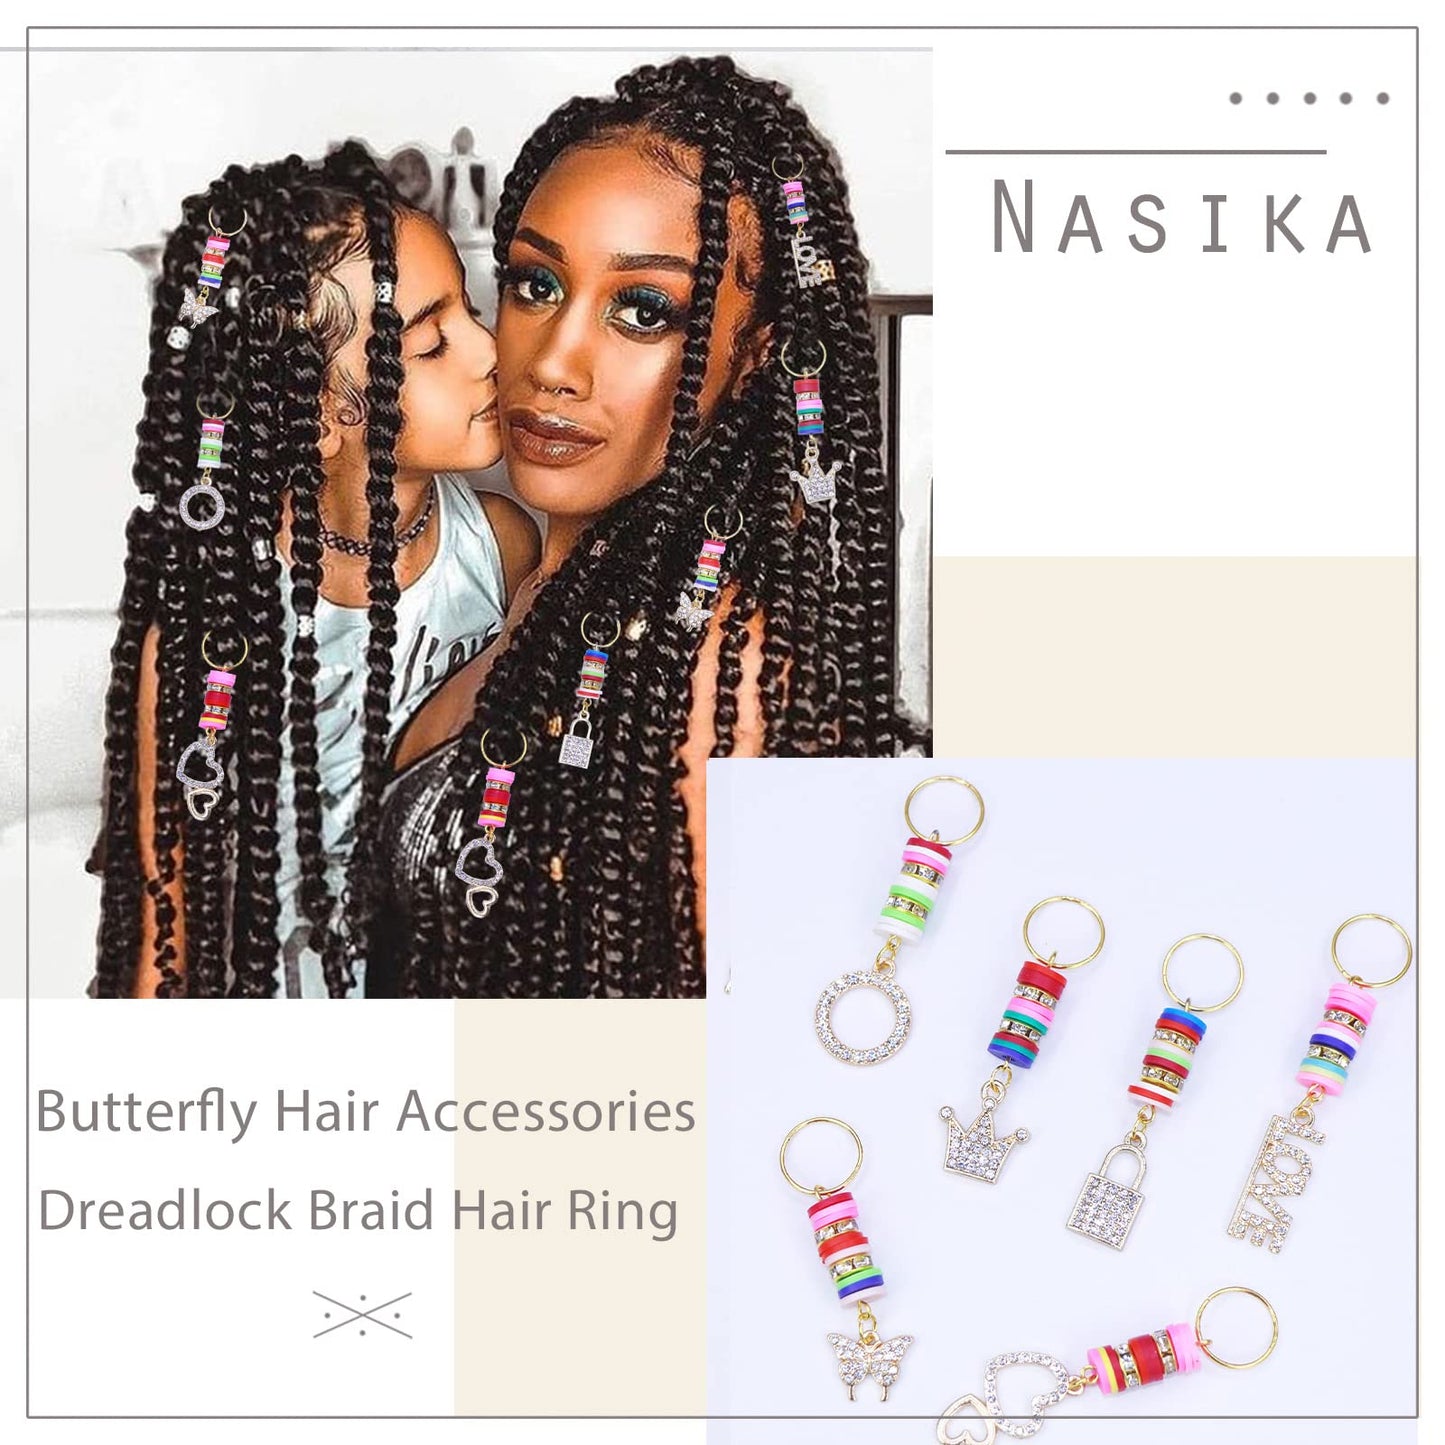 NAISKA 6Pcs Gold Butterfly Heart Pendant Braid Dreadlock Crystal Rhinestone Valentine's Day Hair Accessories Beads Crown Love Pendant Braid Clips Cuffs Rings Hair Jewelry Gifts for Women Teen Girls